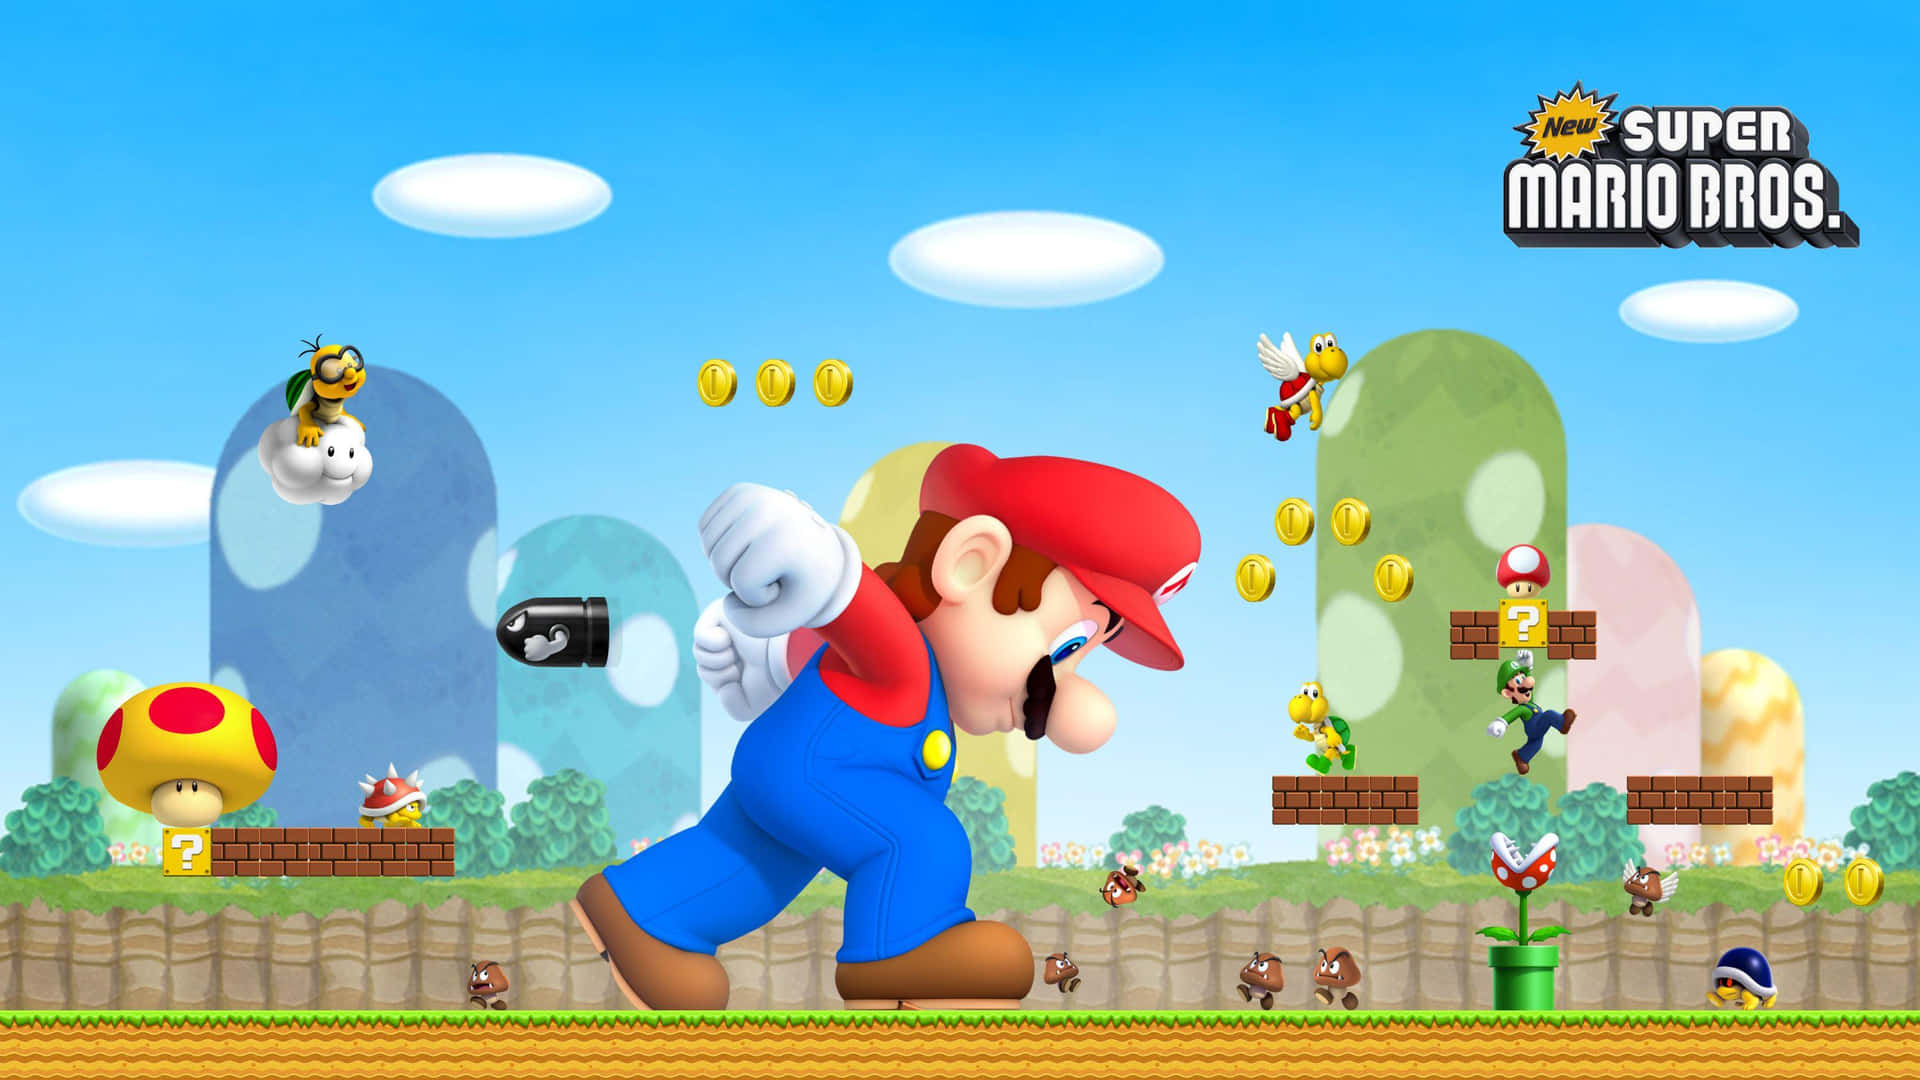 How to Play New Super Mario Bros. Wii